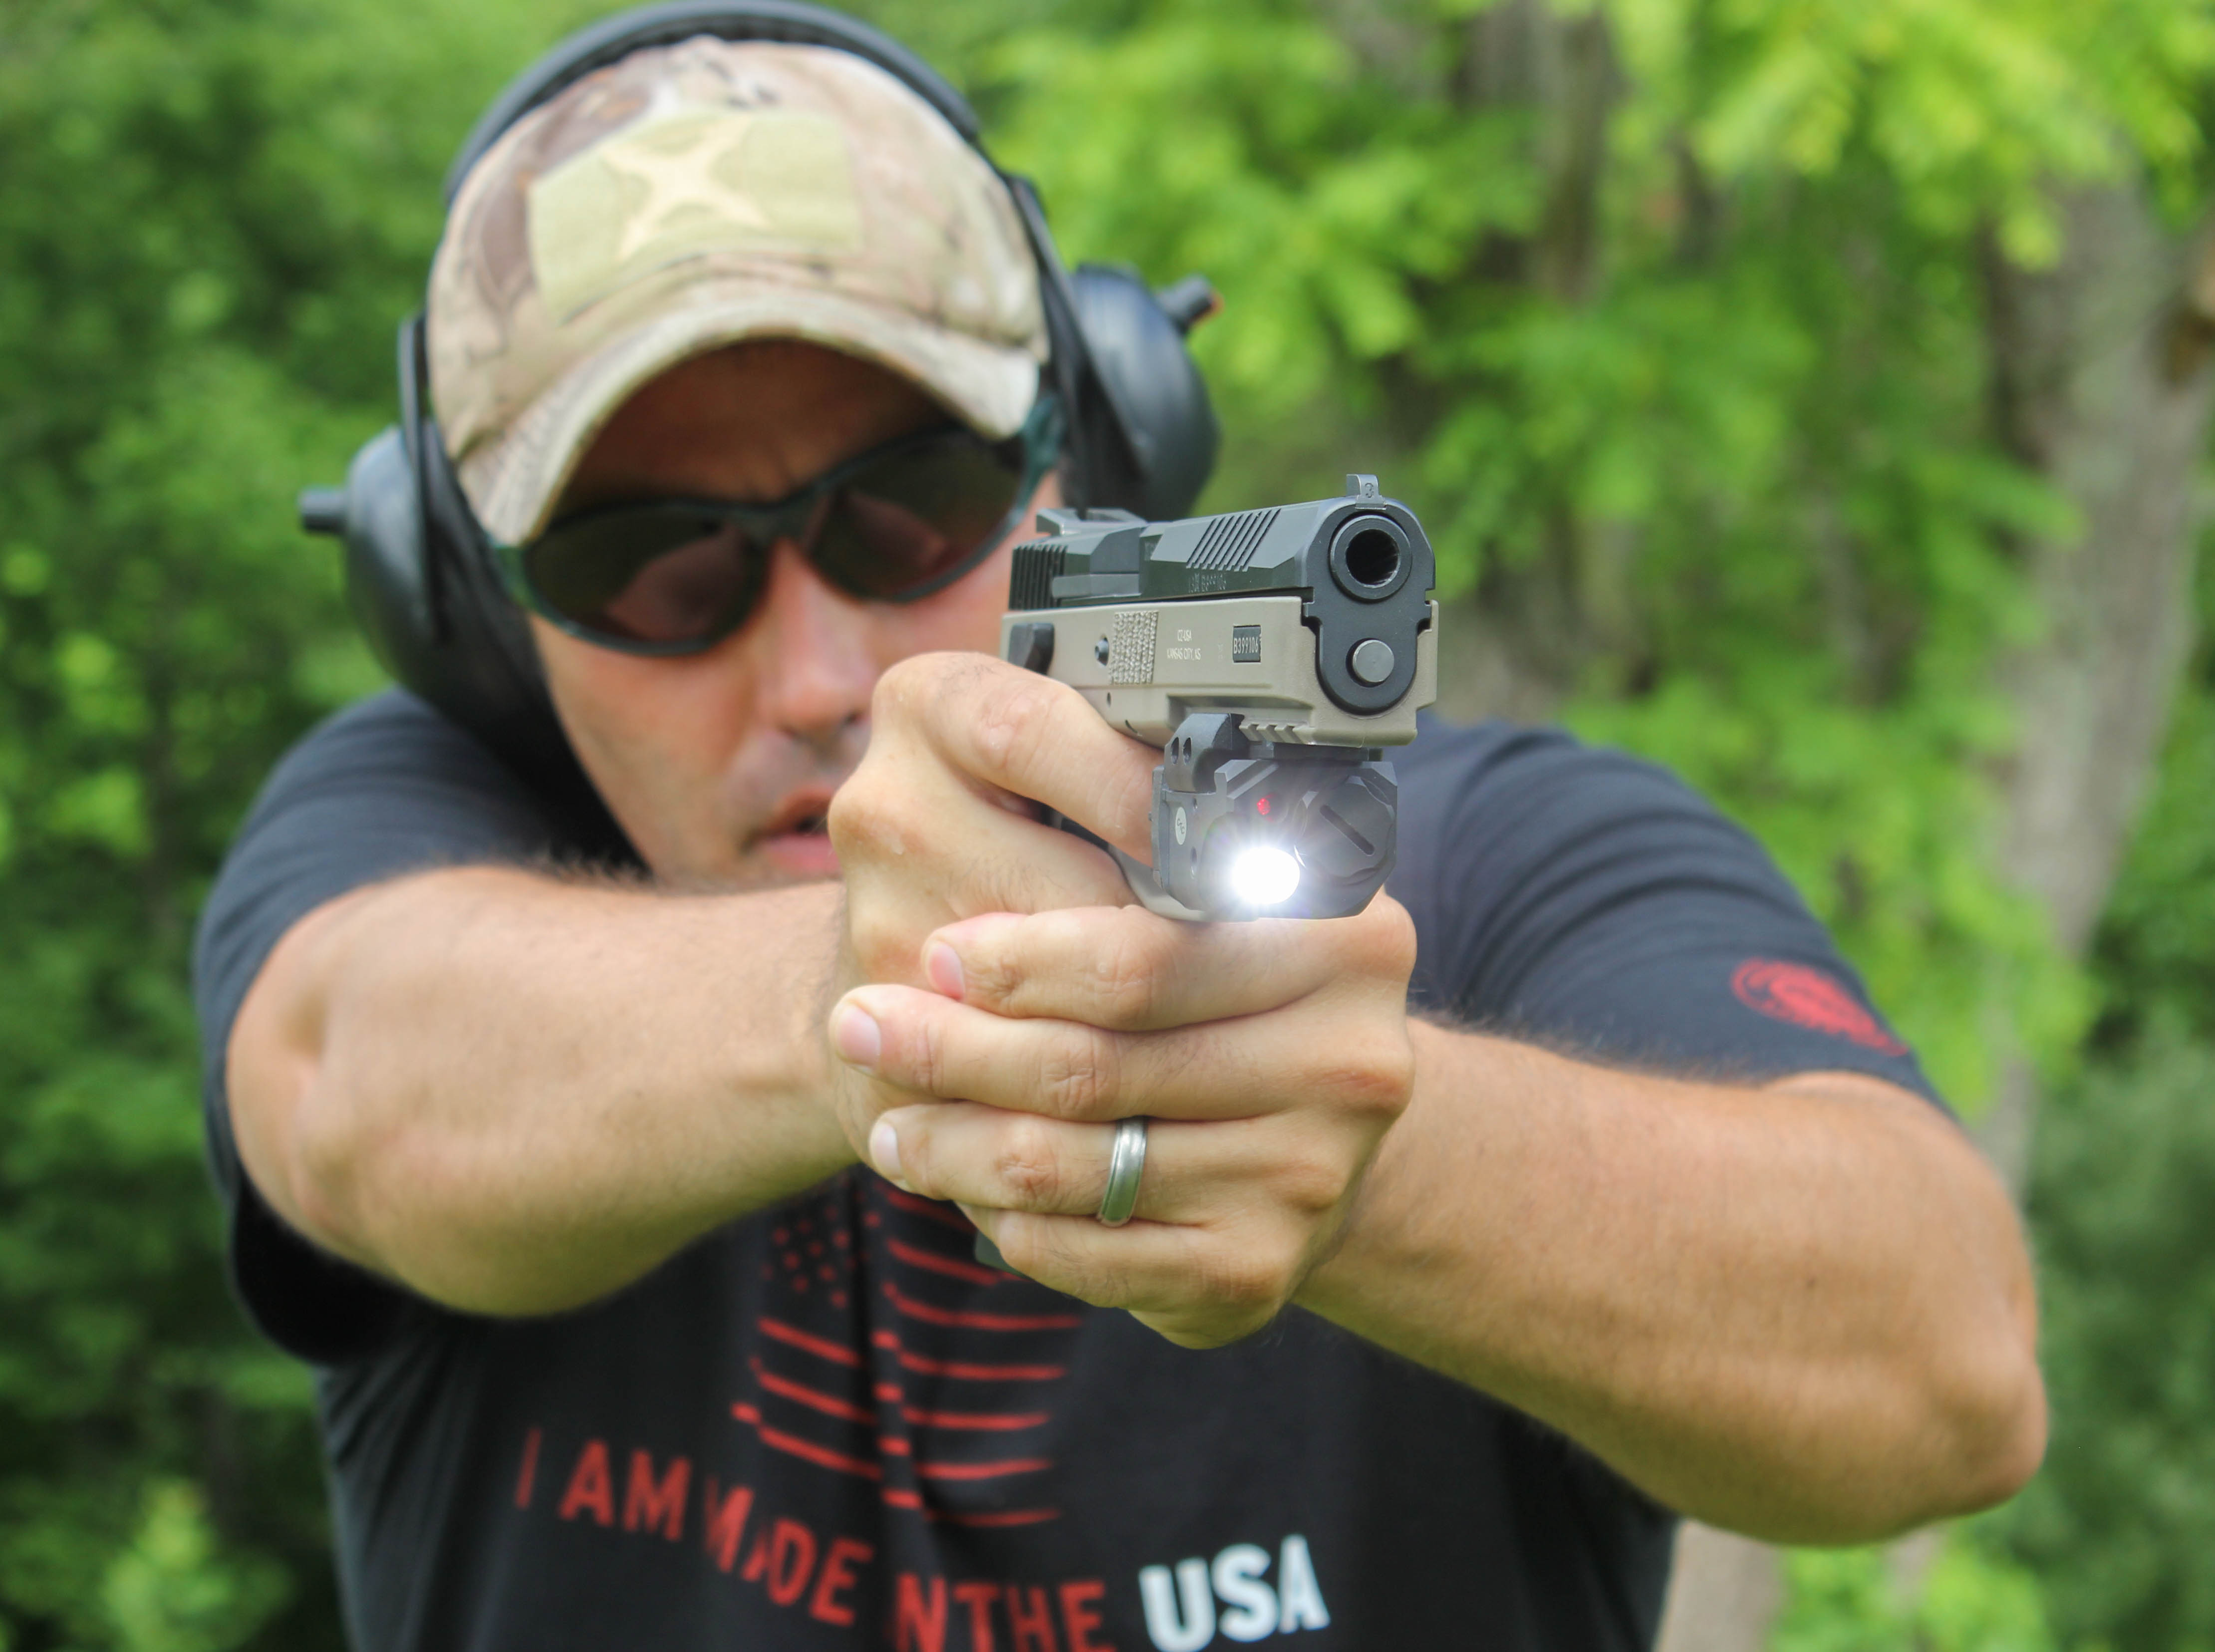 Why You Should Consider Getting Laser Sights - NSSF Let's Go Shooting